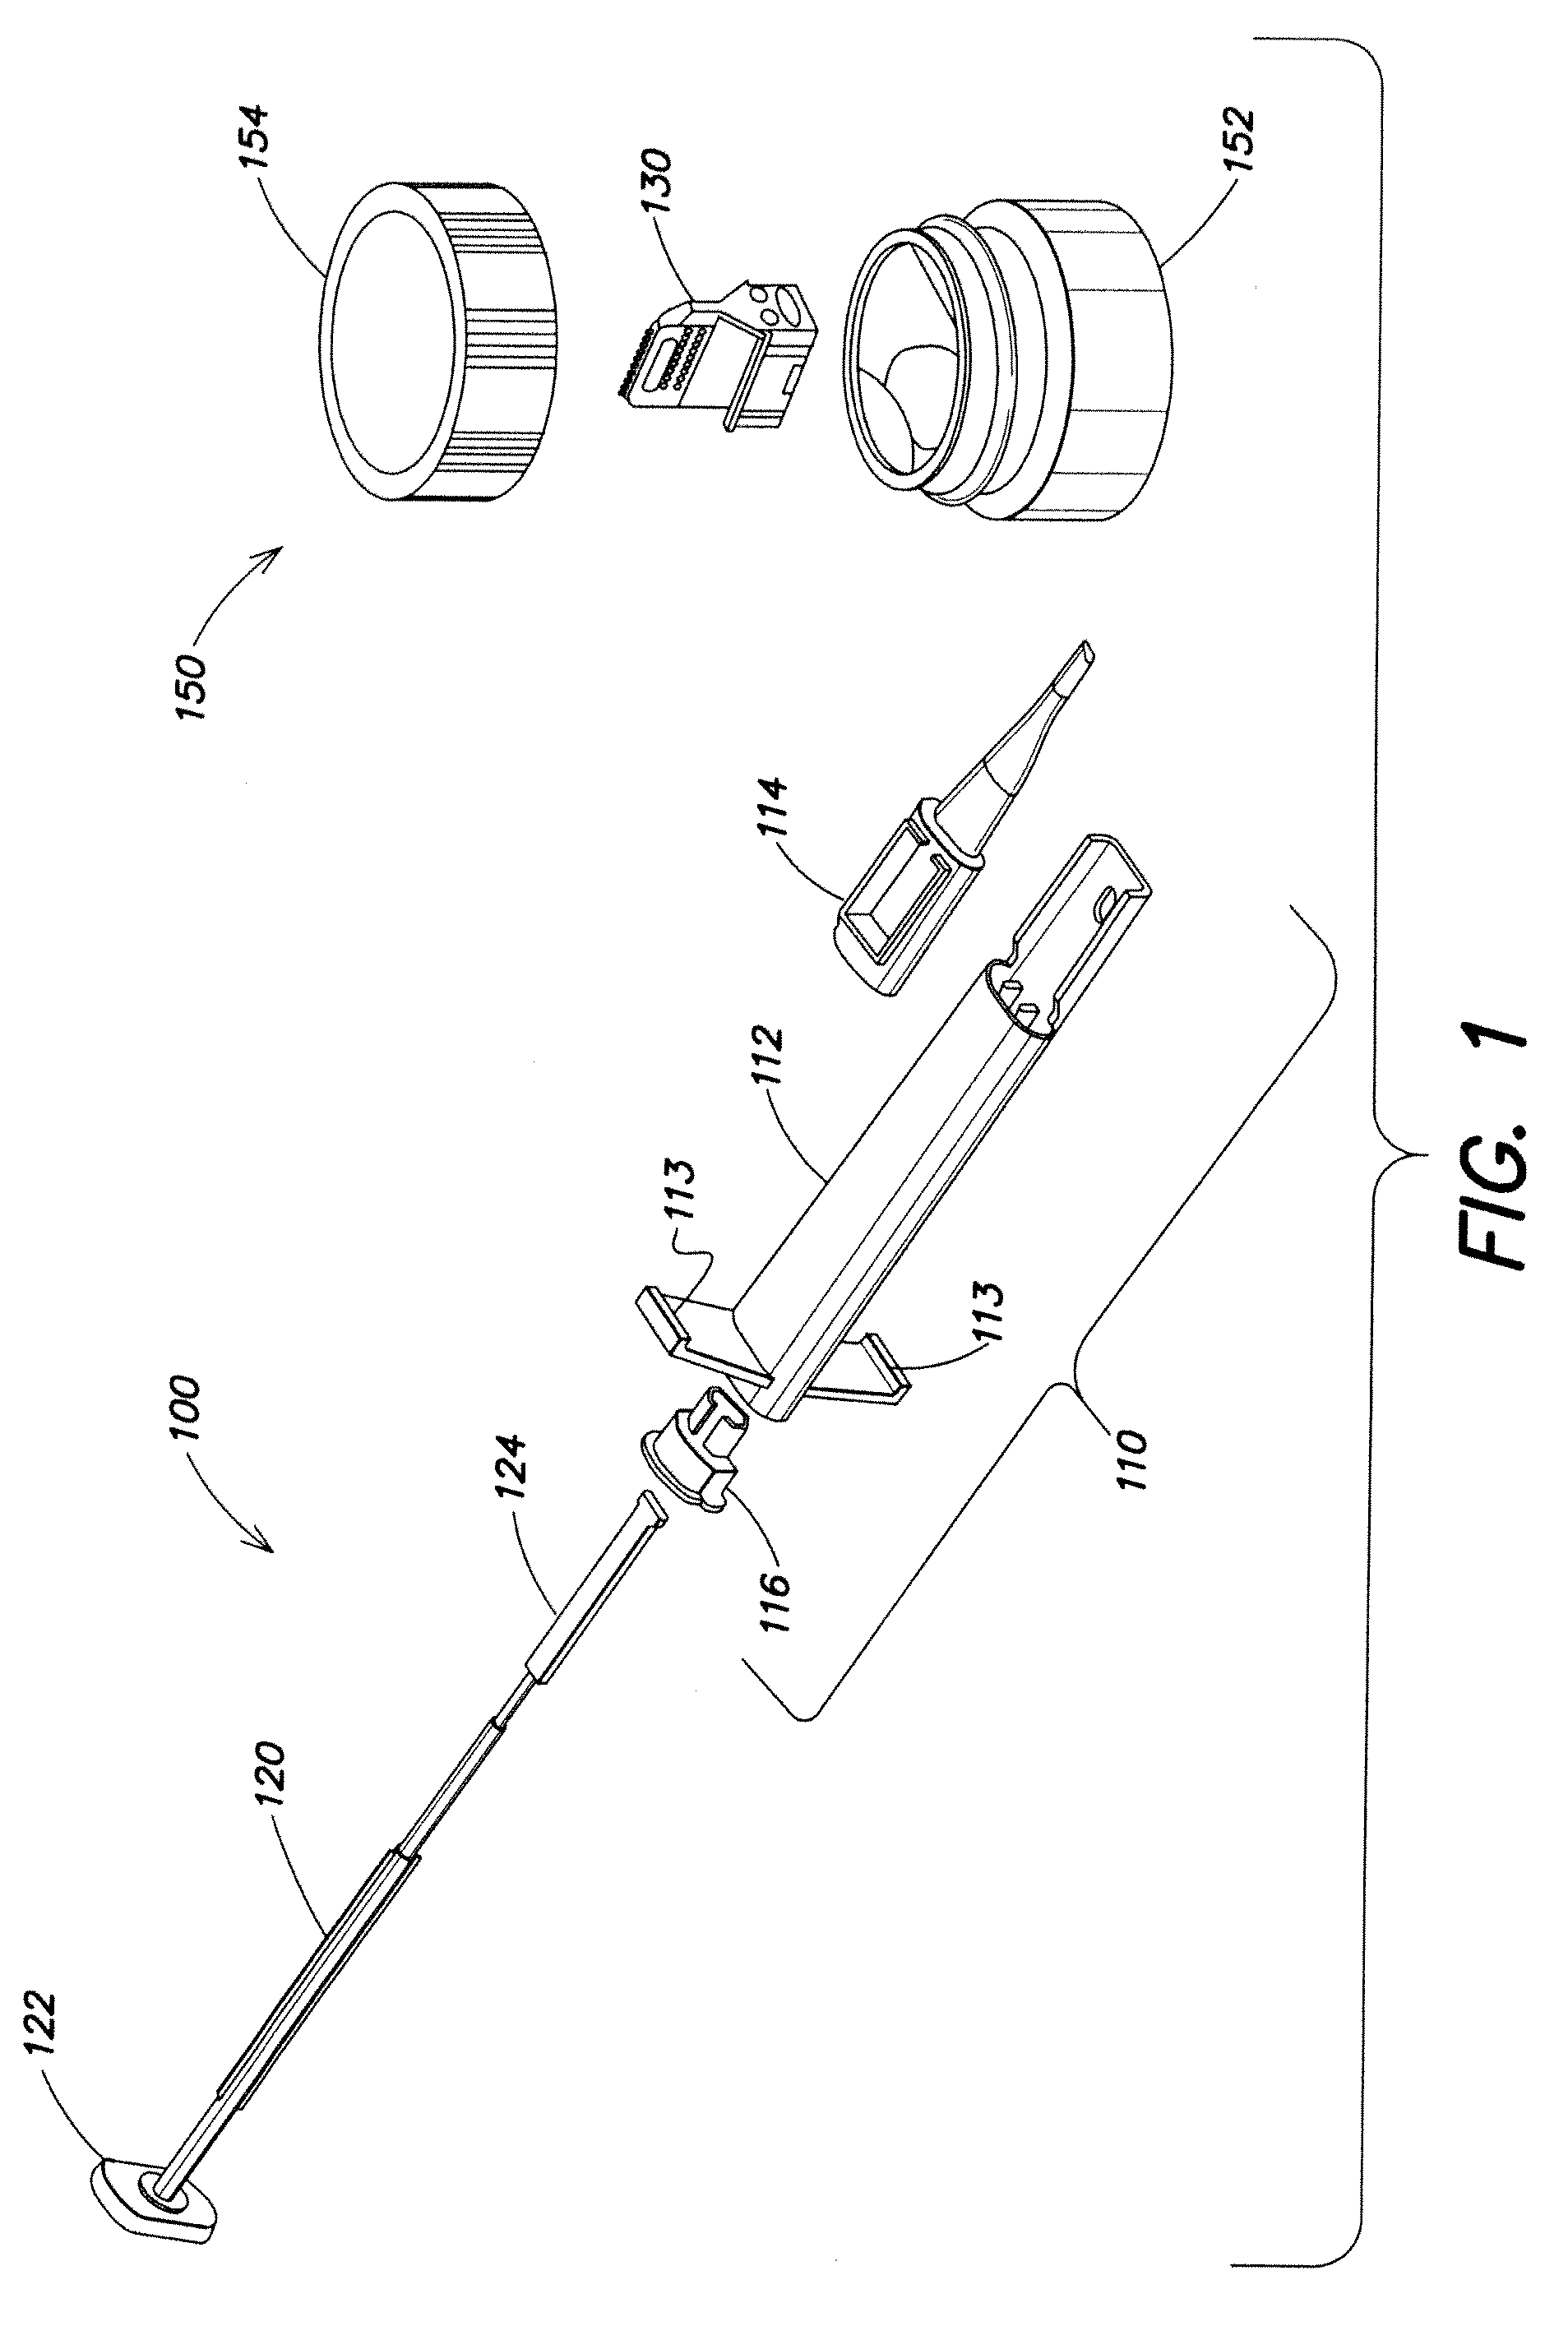 Intraocular Lens Injector System